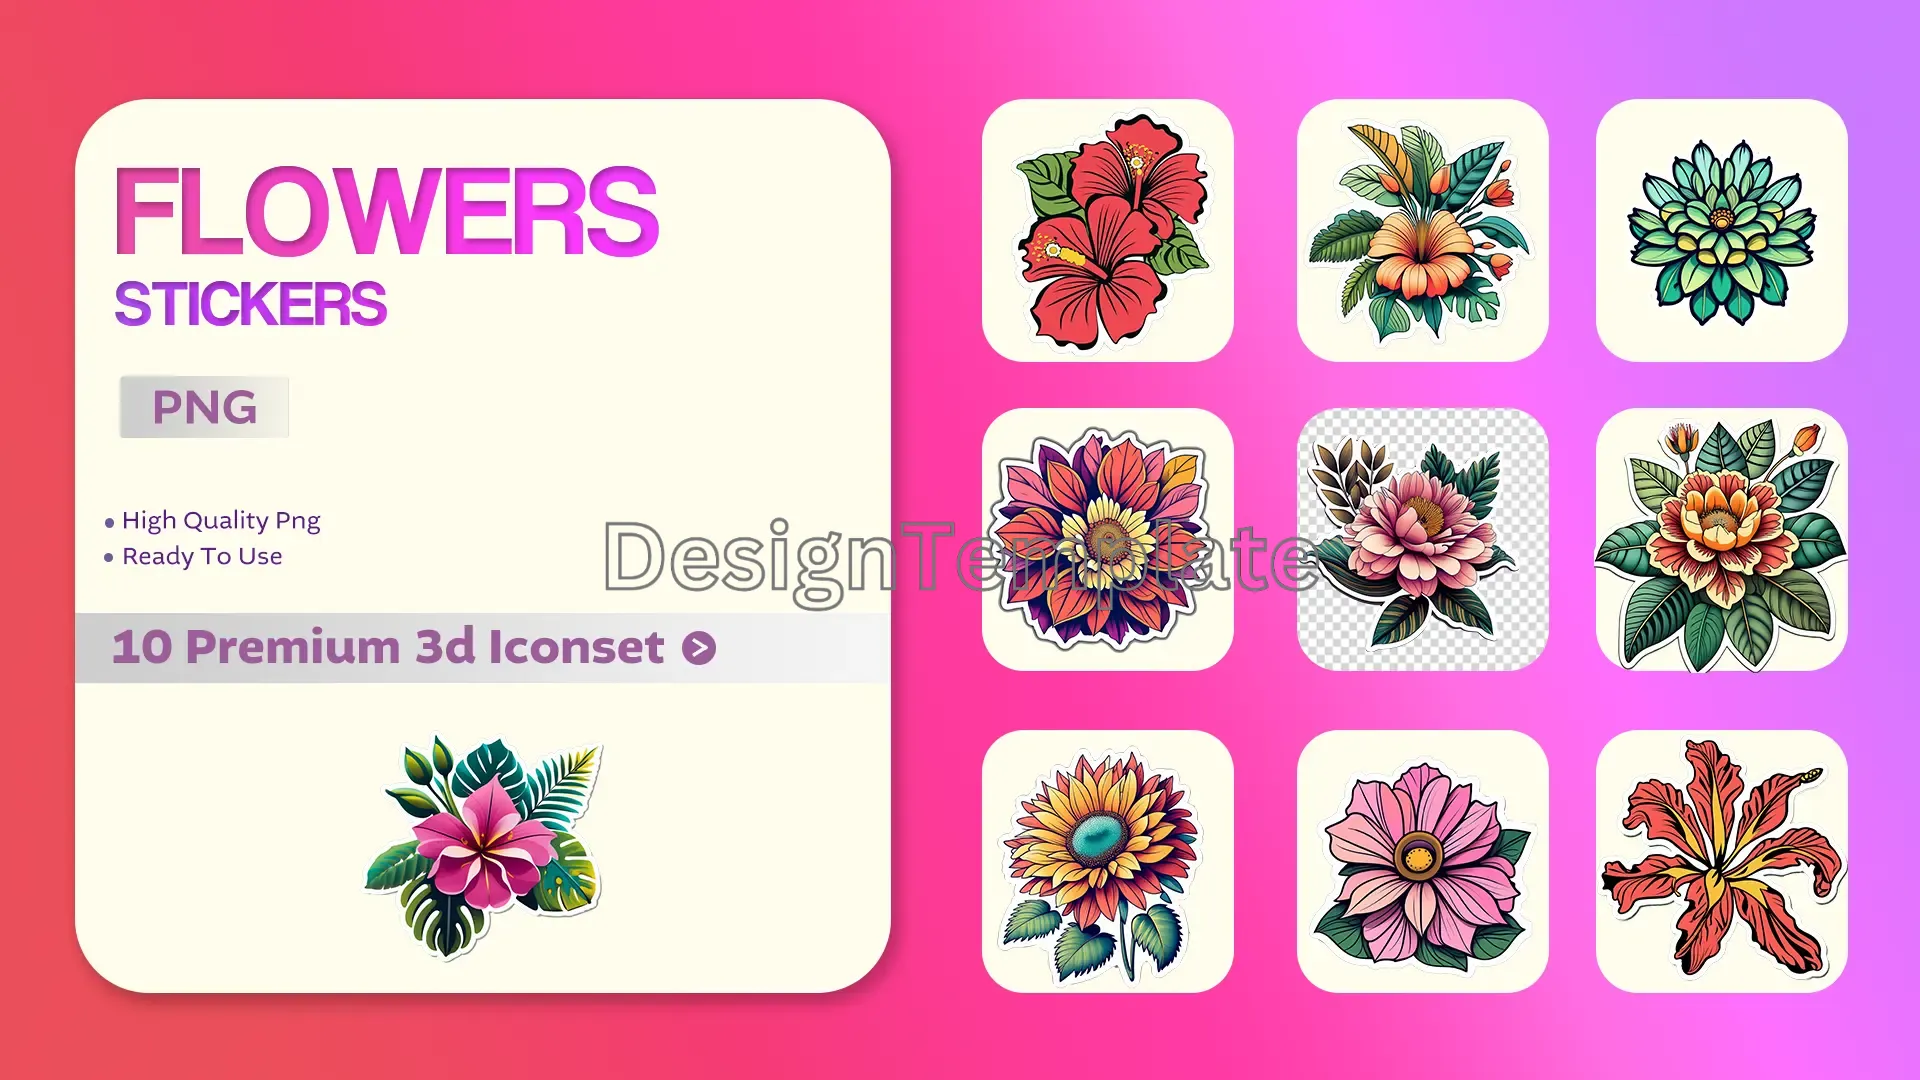 Floral Fantasy Exquisite 3D Flowers Stickers Collection